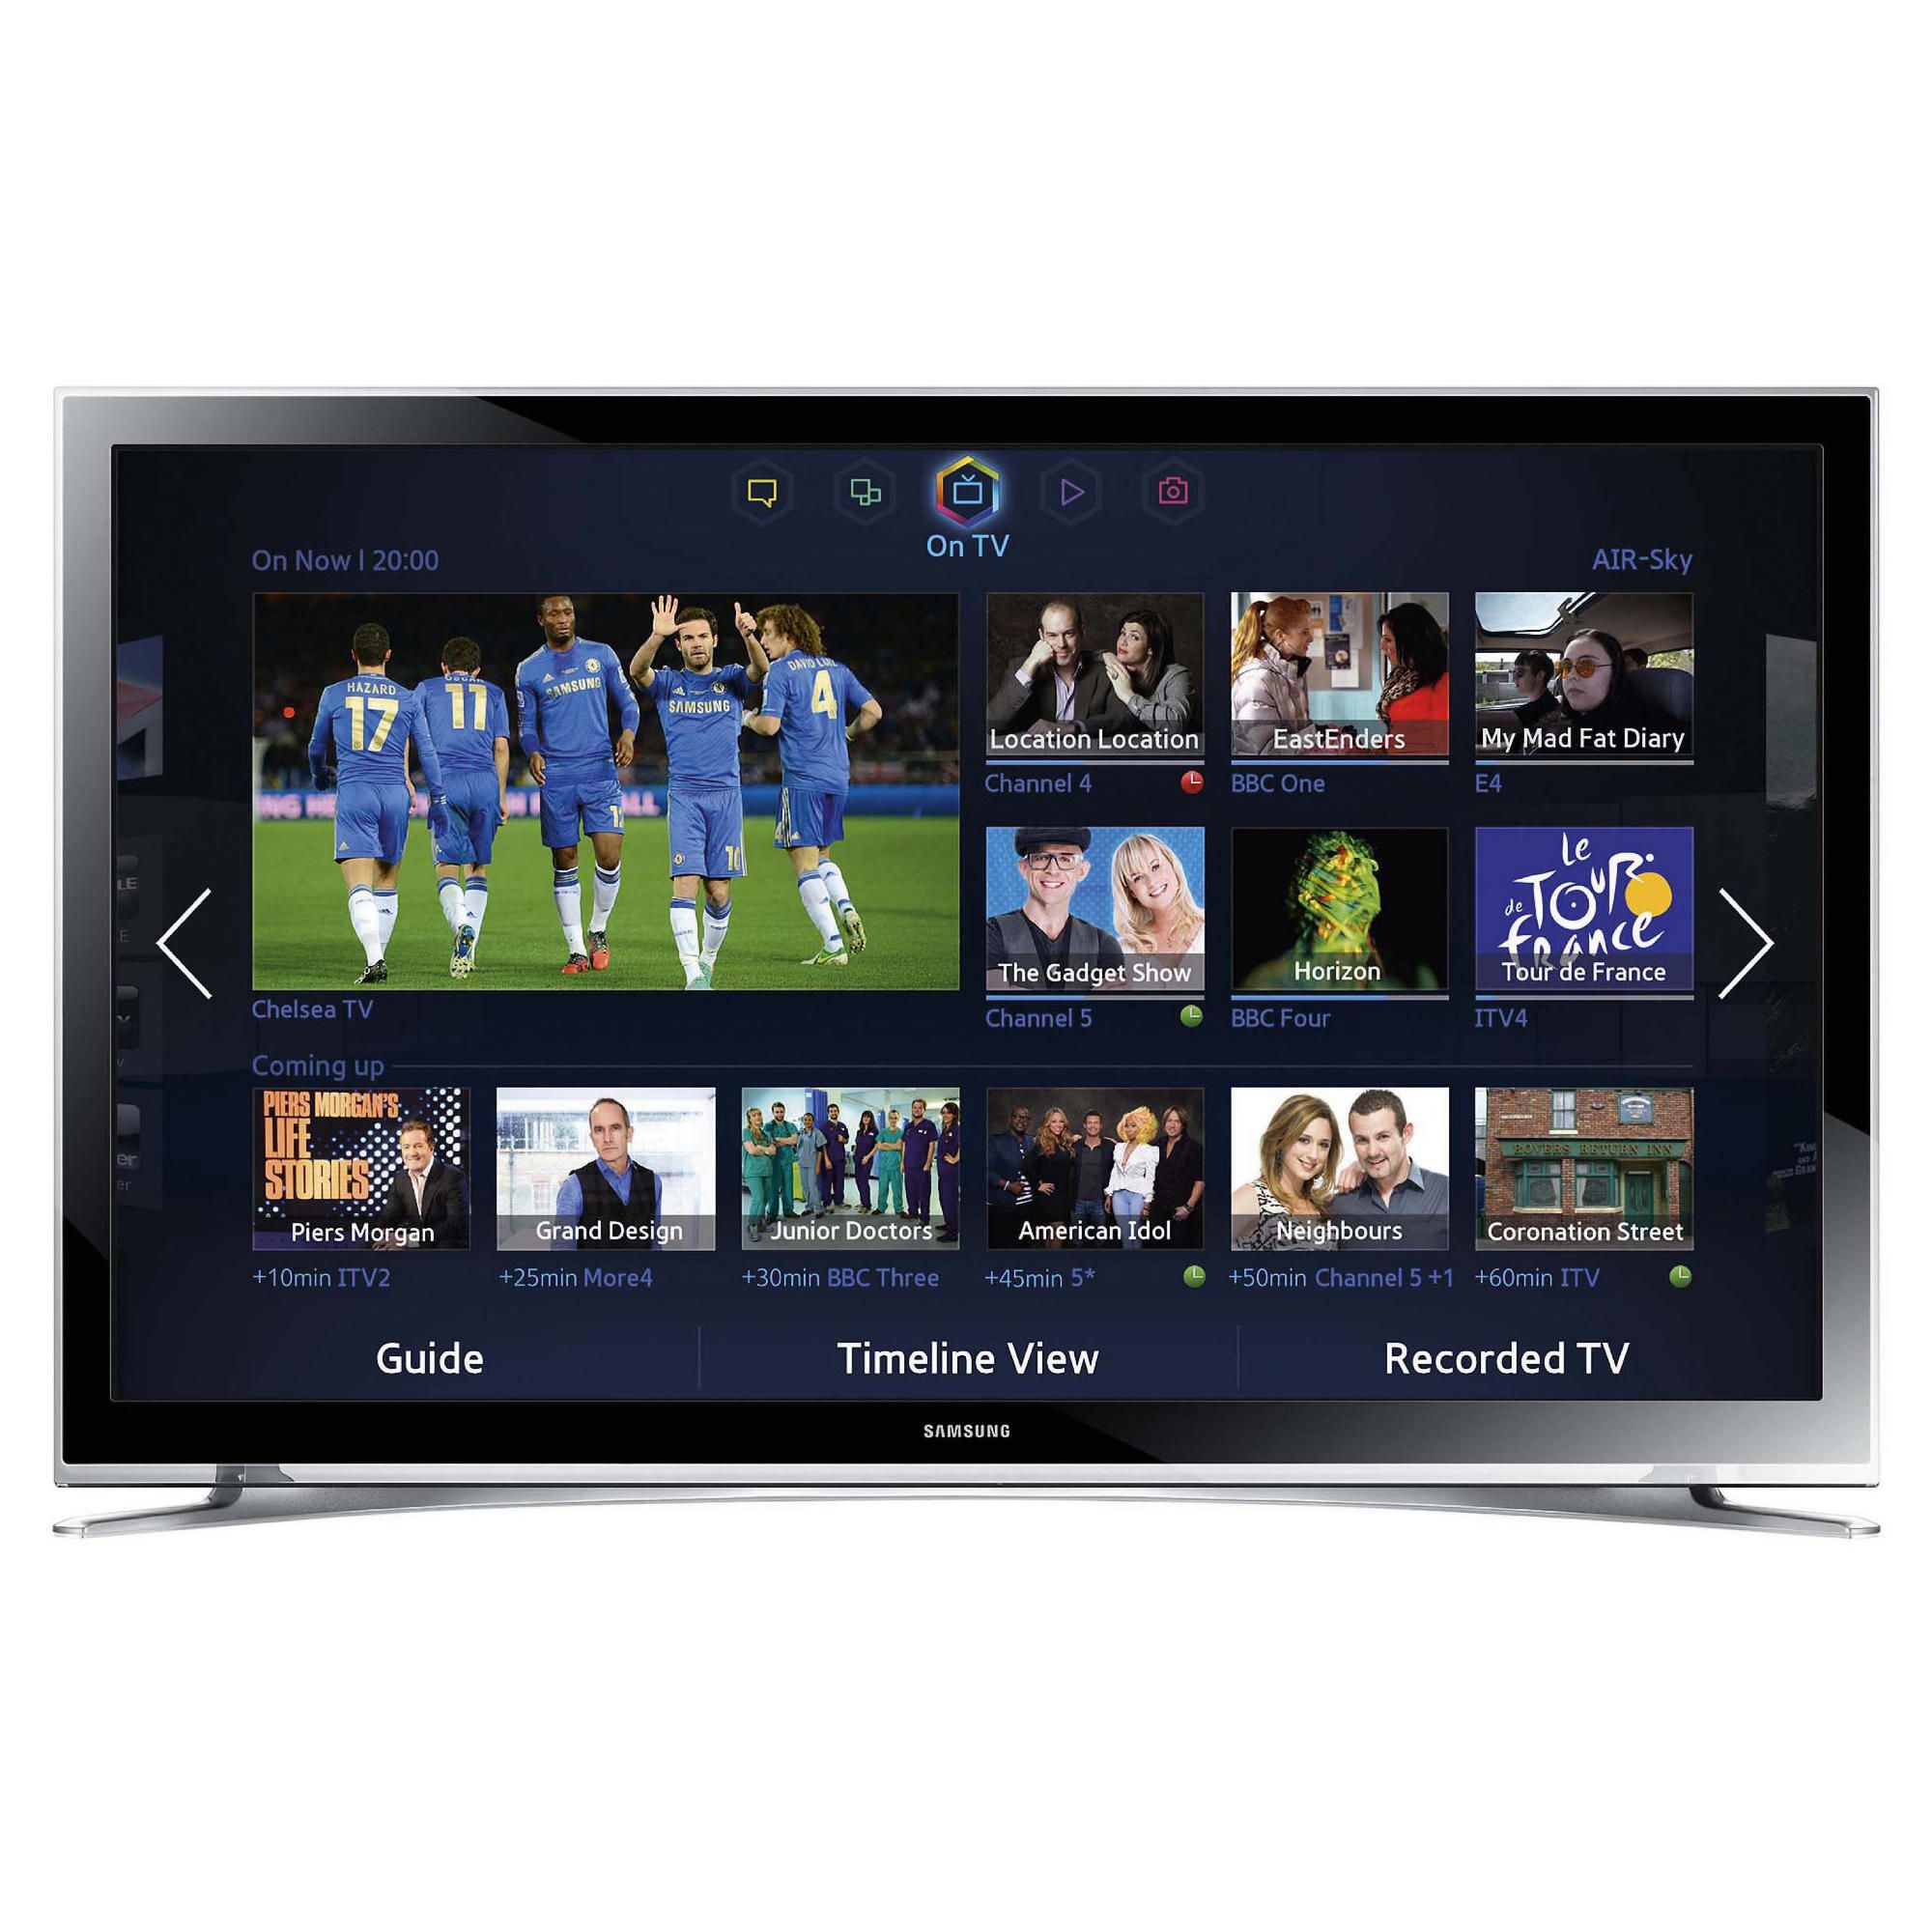 Samsung 22” UE22F5400 Full HD 1080p LED SMART TV with Freeview